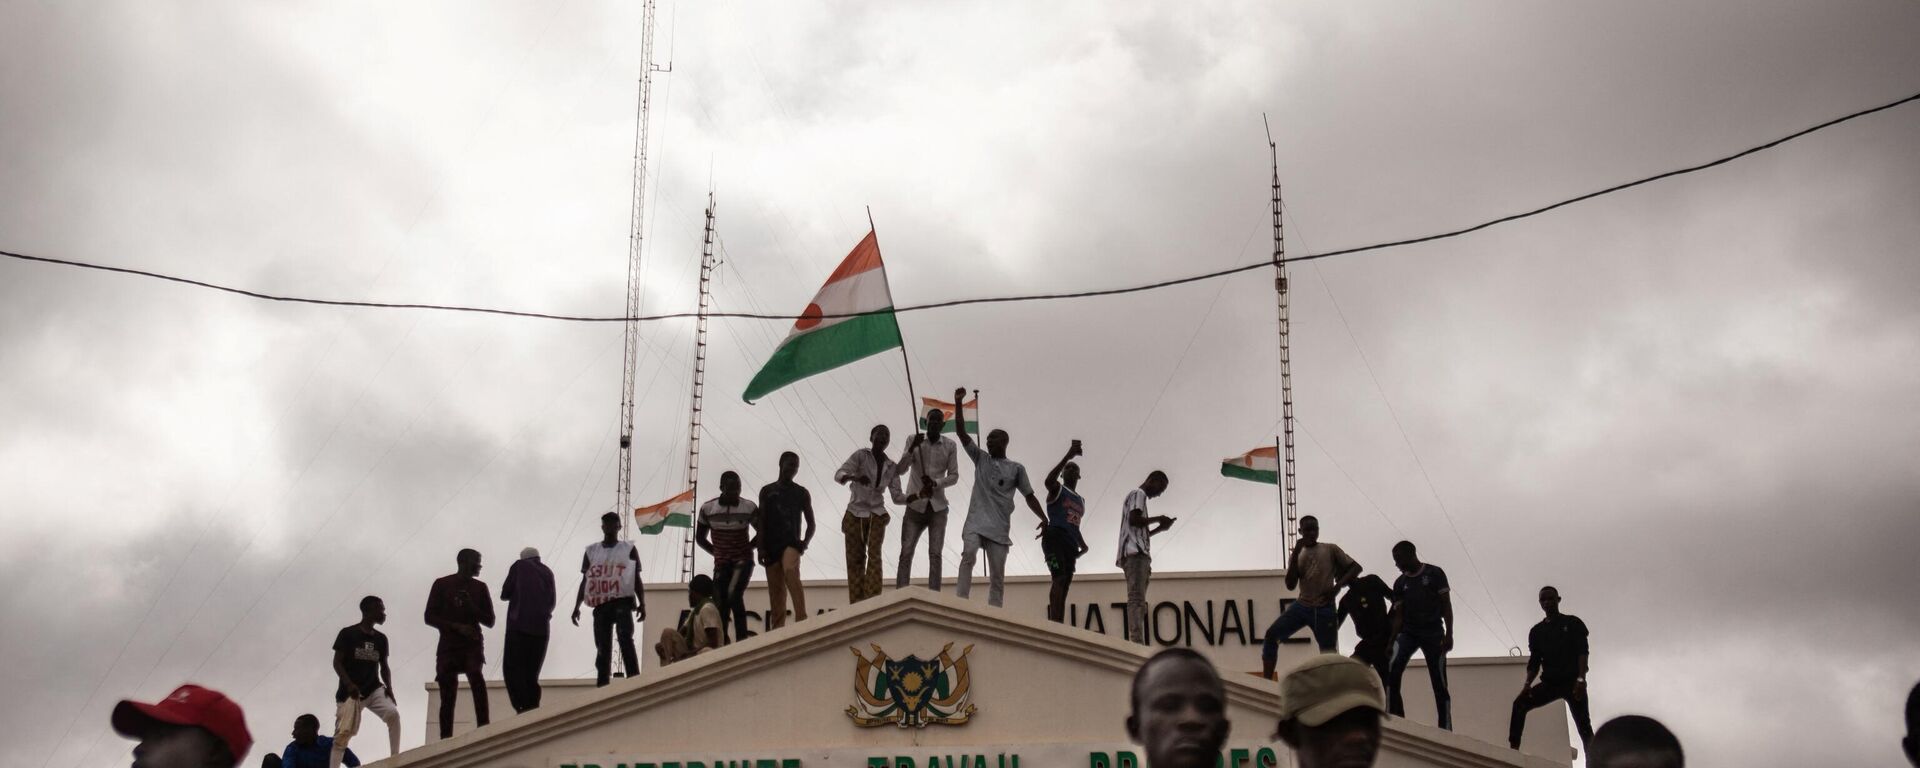 Protesters hold a Niger flag during a demonstration on independence day in Niamey on August 3, 2023. Hundreds of people backing the coup in Niger gathered on August 3, 2023 for a mass rally in the capital Niamey with some brandishing giant Russian flags. - Sputnik Srbija, 1920, 25.08.2023